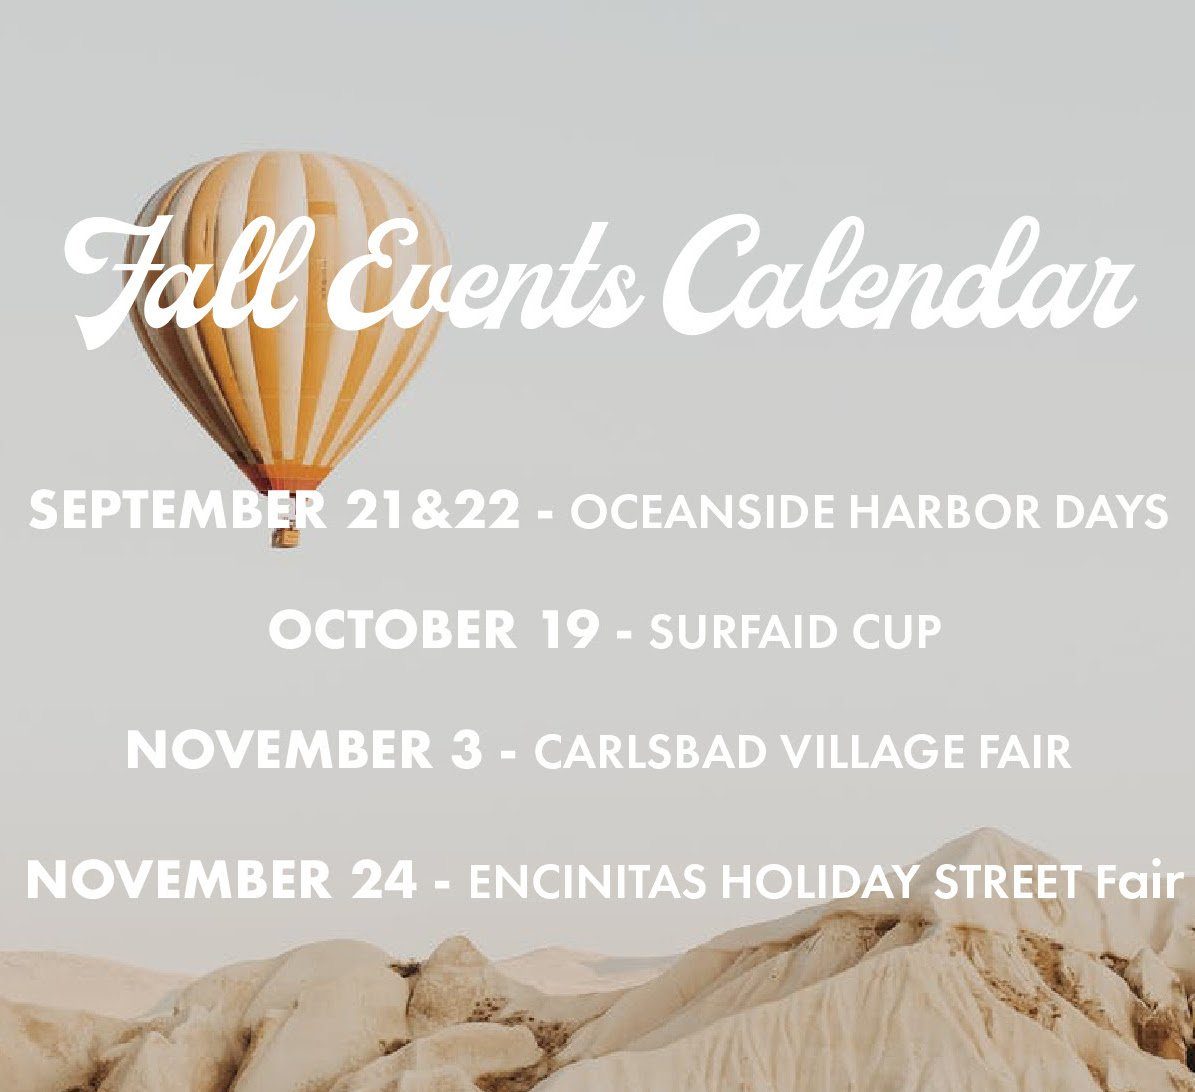 Come hang with us at these Fall Events!